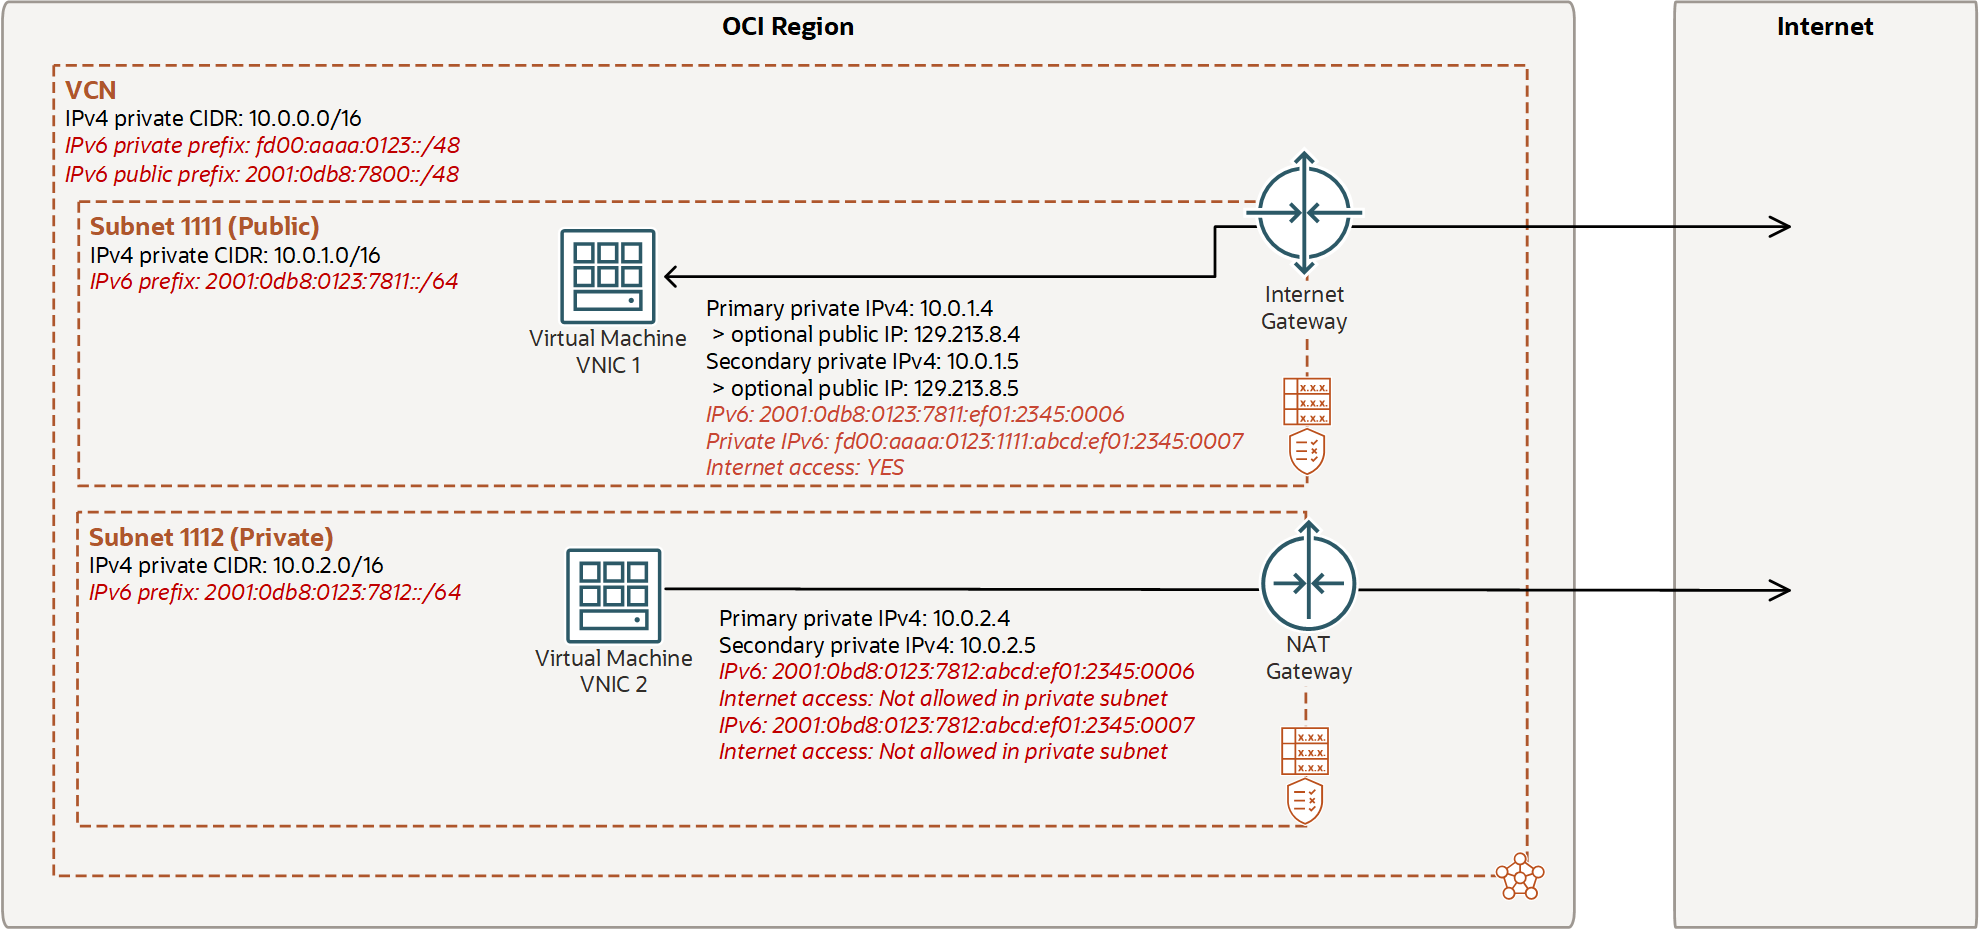 This image shows an example of IPv4 and IPv6 addresses used in a VCN with an Oracle-provided IPv6 CIDR.